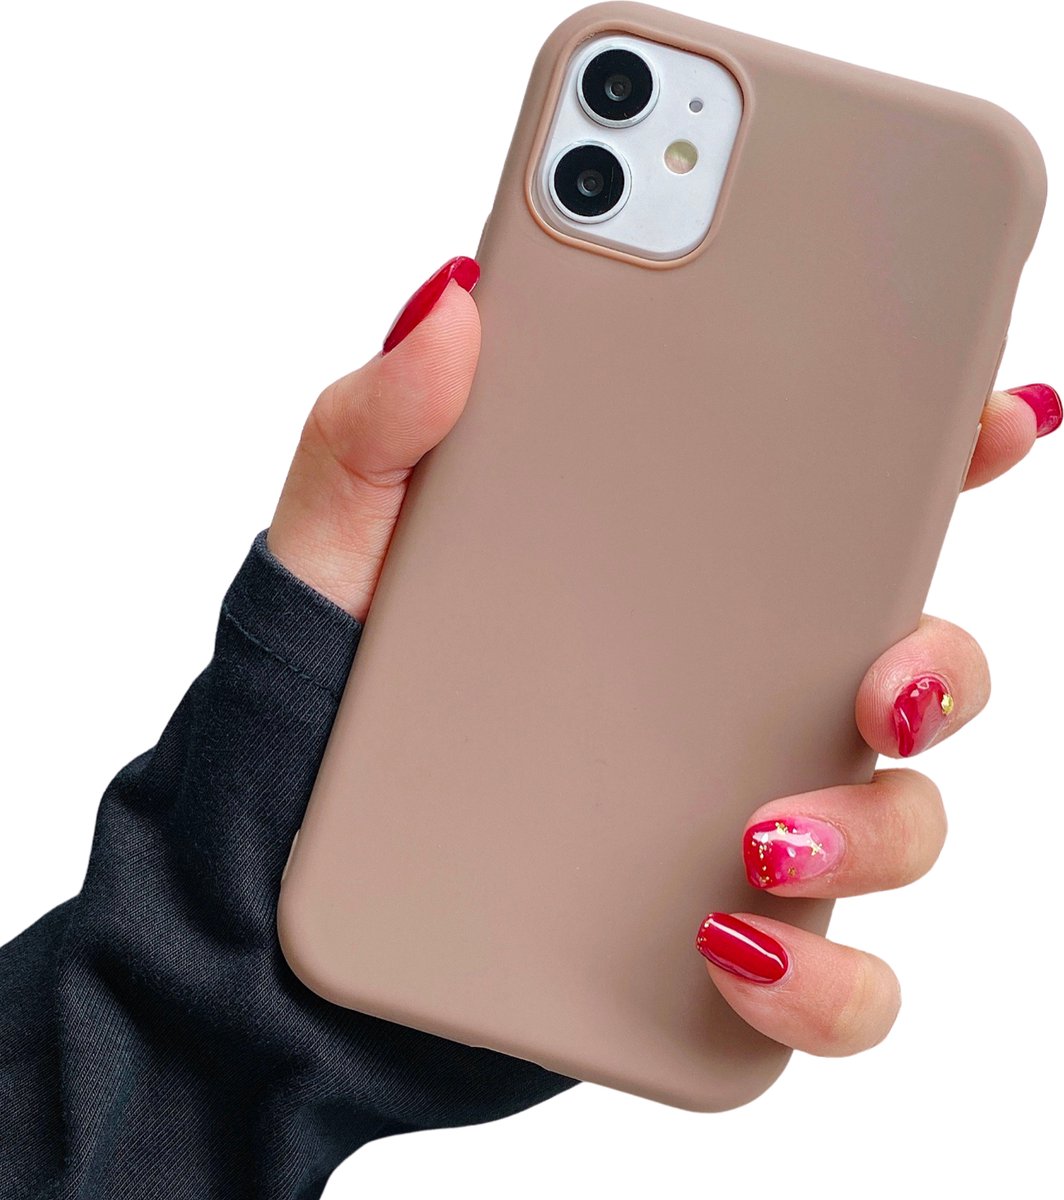 Apple iPhone 11 Soft Touch Hoesje - Bruin - Stevig Shockproof TPU Materiaal - Zachte Coating - Siliconen Feel Case - Back Cover